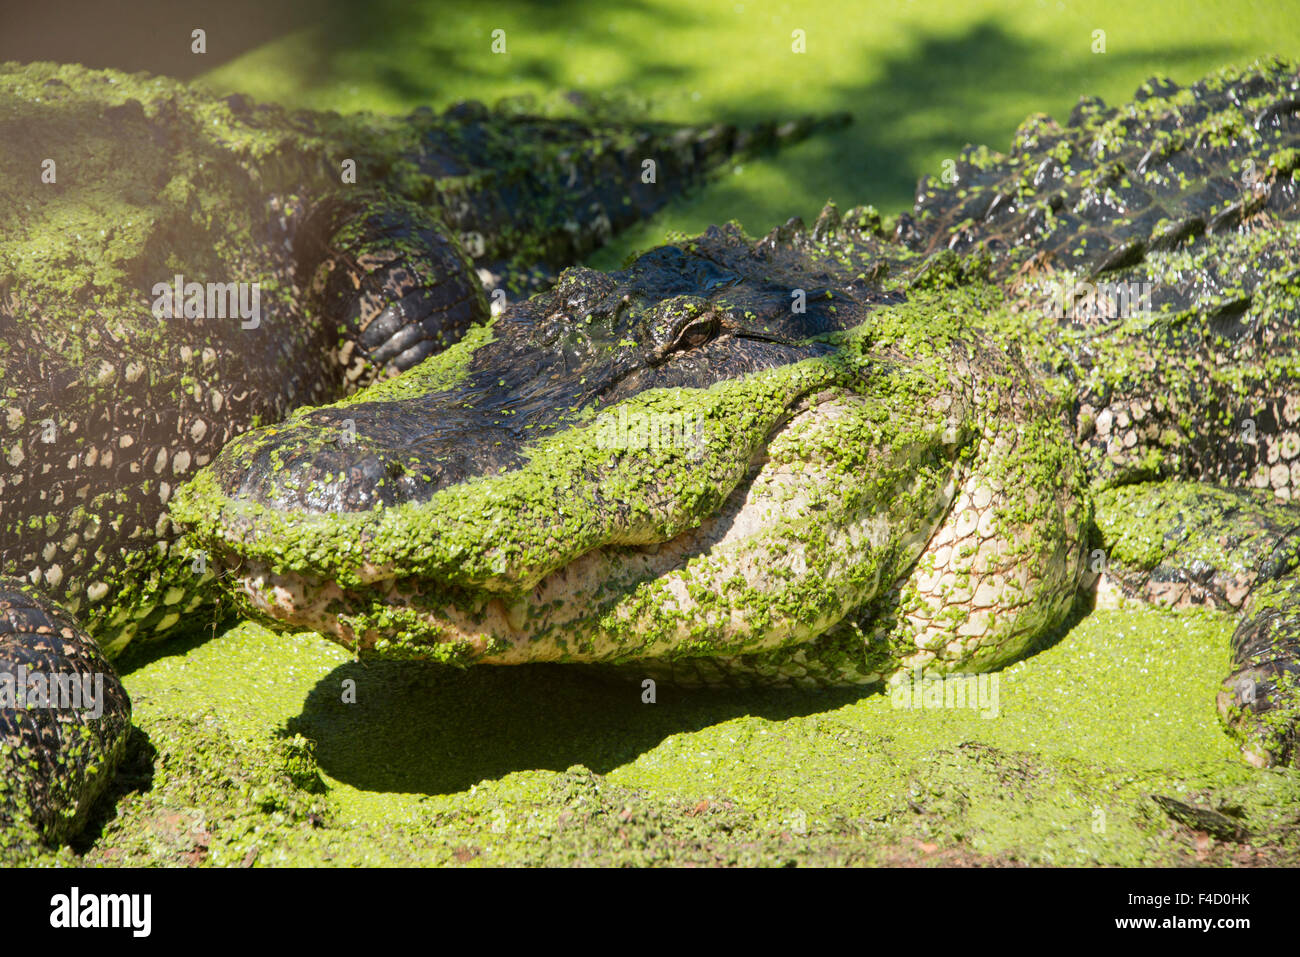 Australia, Broome. Malcolm Douglas Crocodile Park. Large American alligator (Alligator mississippiensis) covered in green duckweed (introduced species, Lemna minuta). (Large format sizes available) Stock Photo